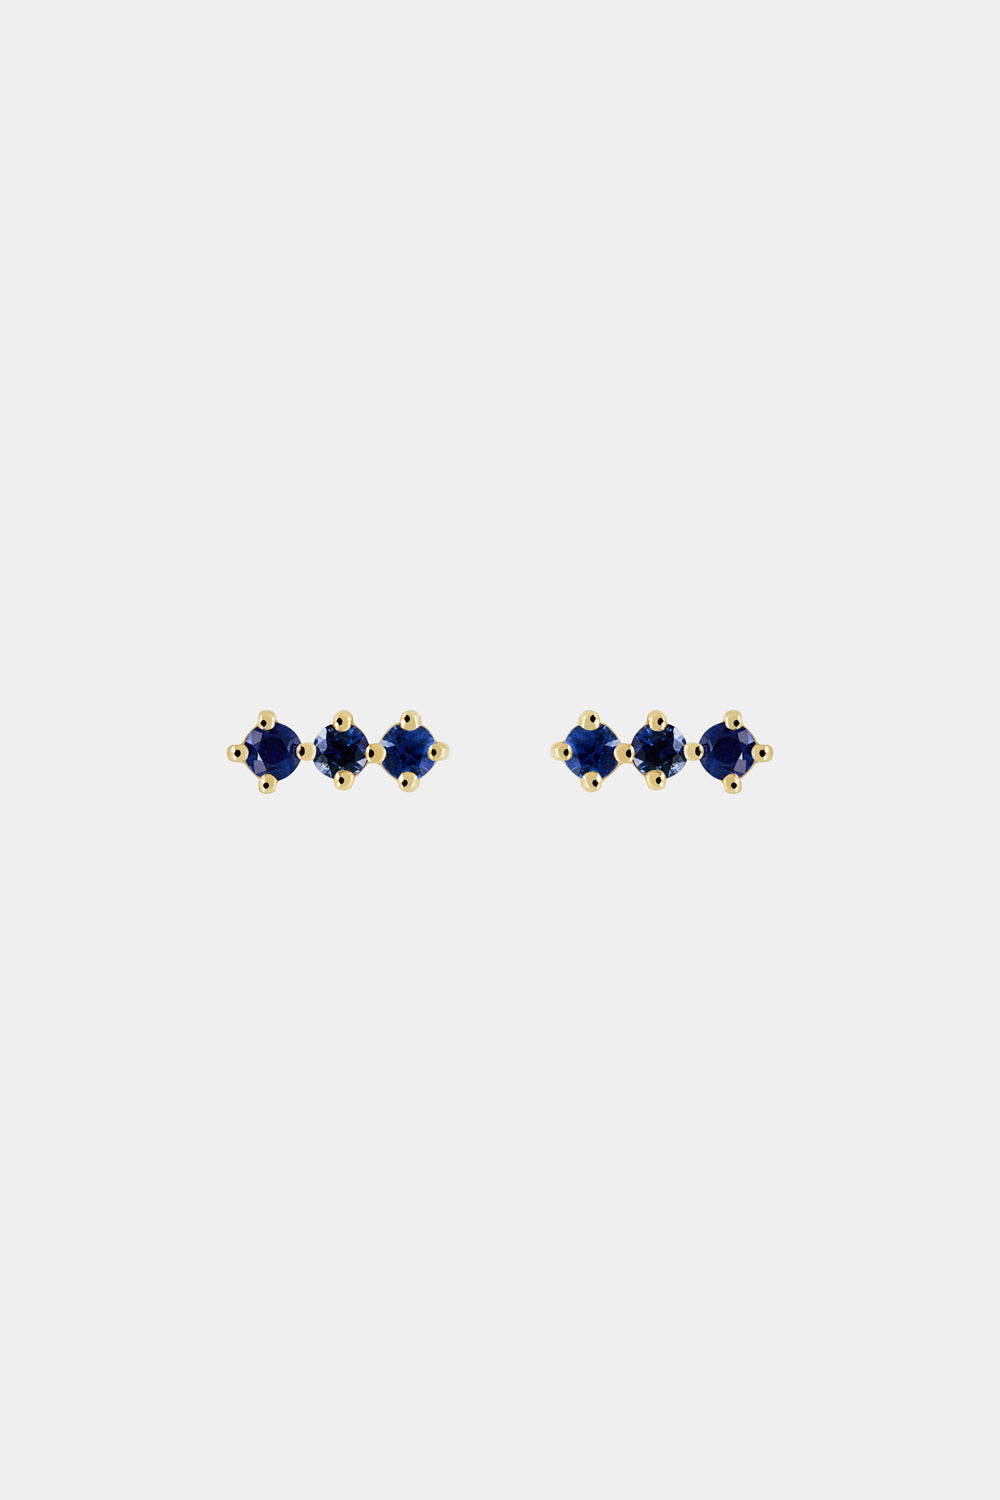 Buttercup Sapphire Bar Earrings | Yellow Gold, More Options Available